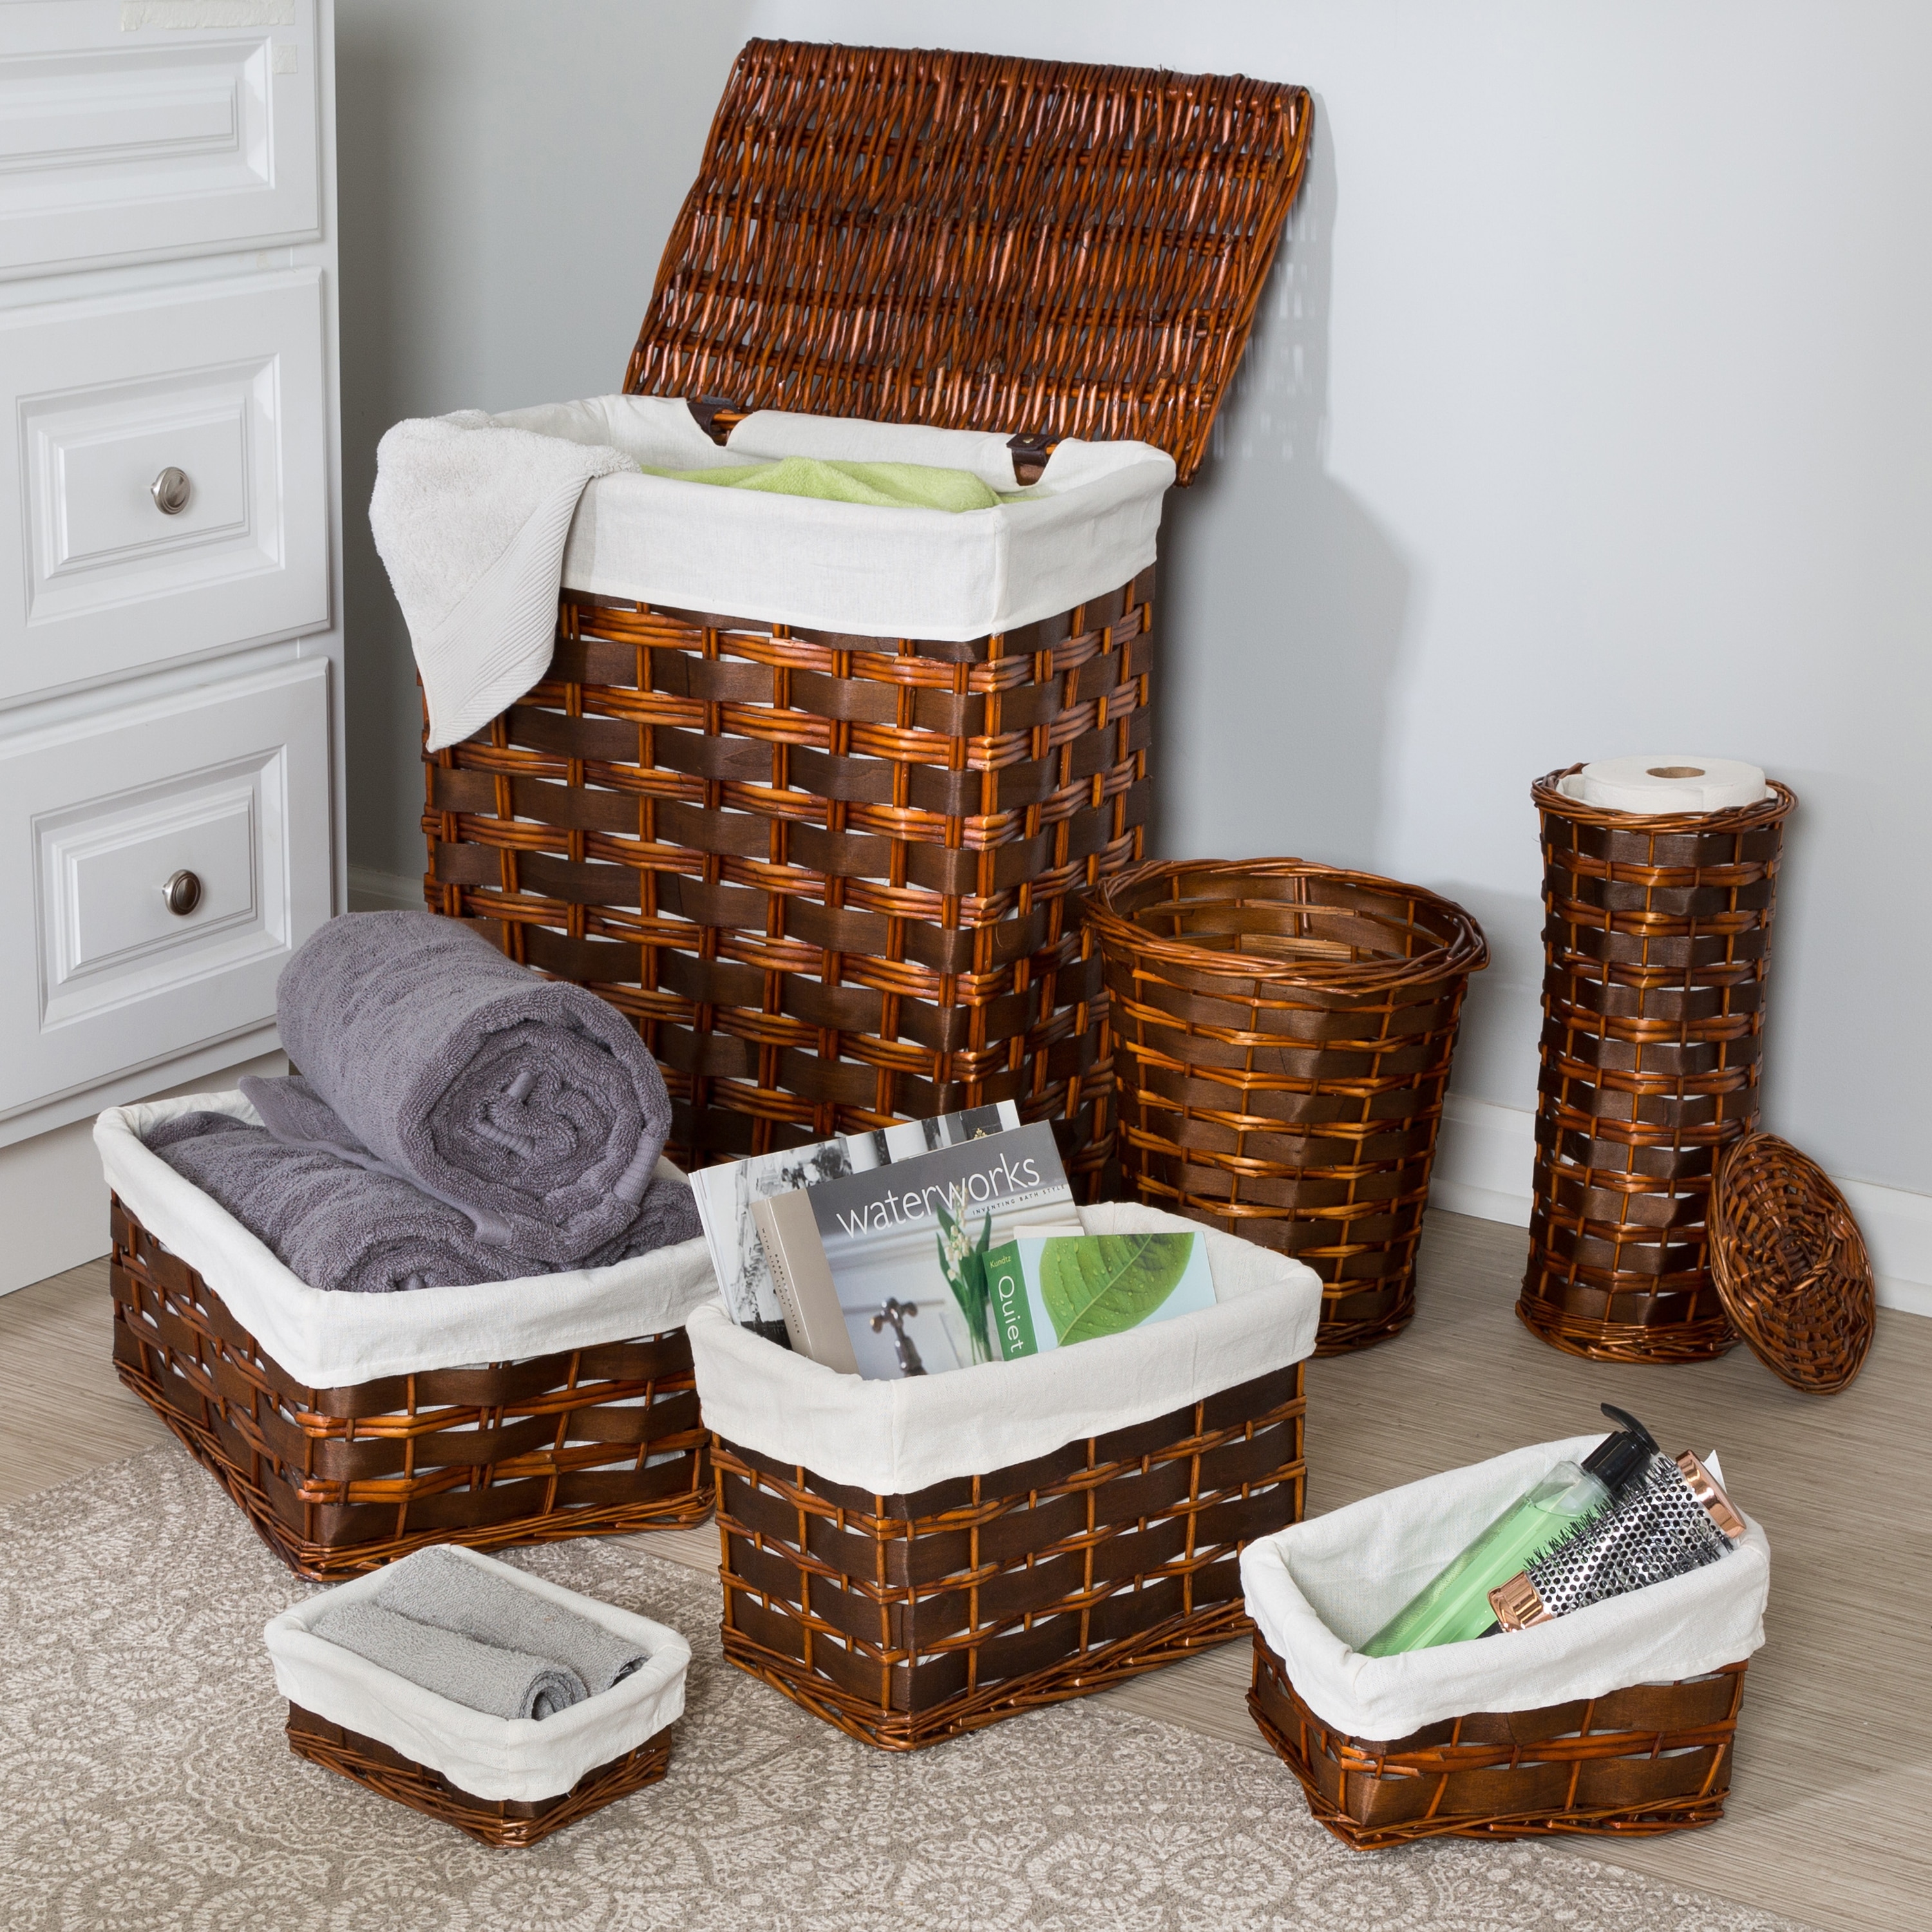 https://ak1.ostkcdn.com/images/products/is/images/direct/5a4d59cd97c291fffe24f1c3d8989048295ea5db/Honey-Can-Do-7-Piece-Wicker-Hamper-and-Bath-Set.jpg